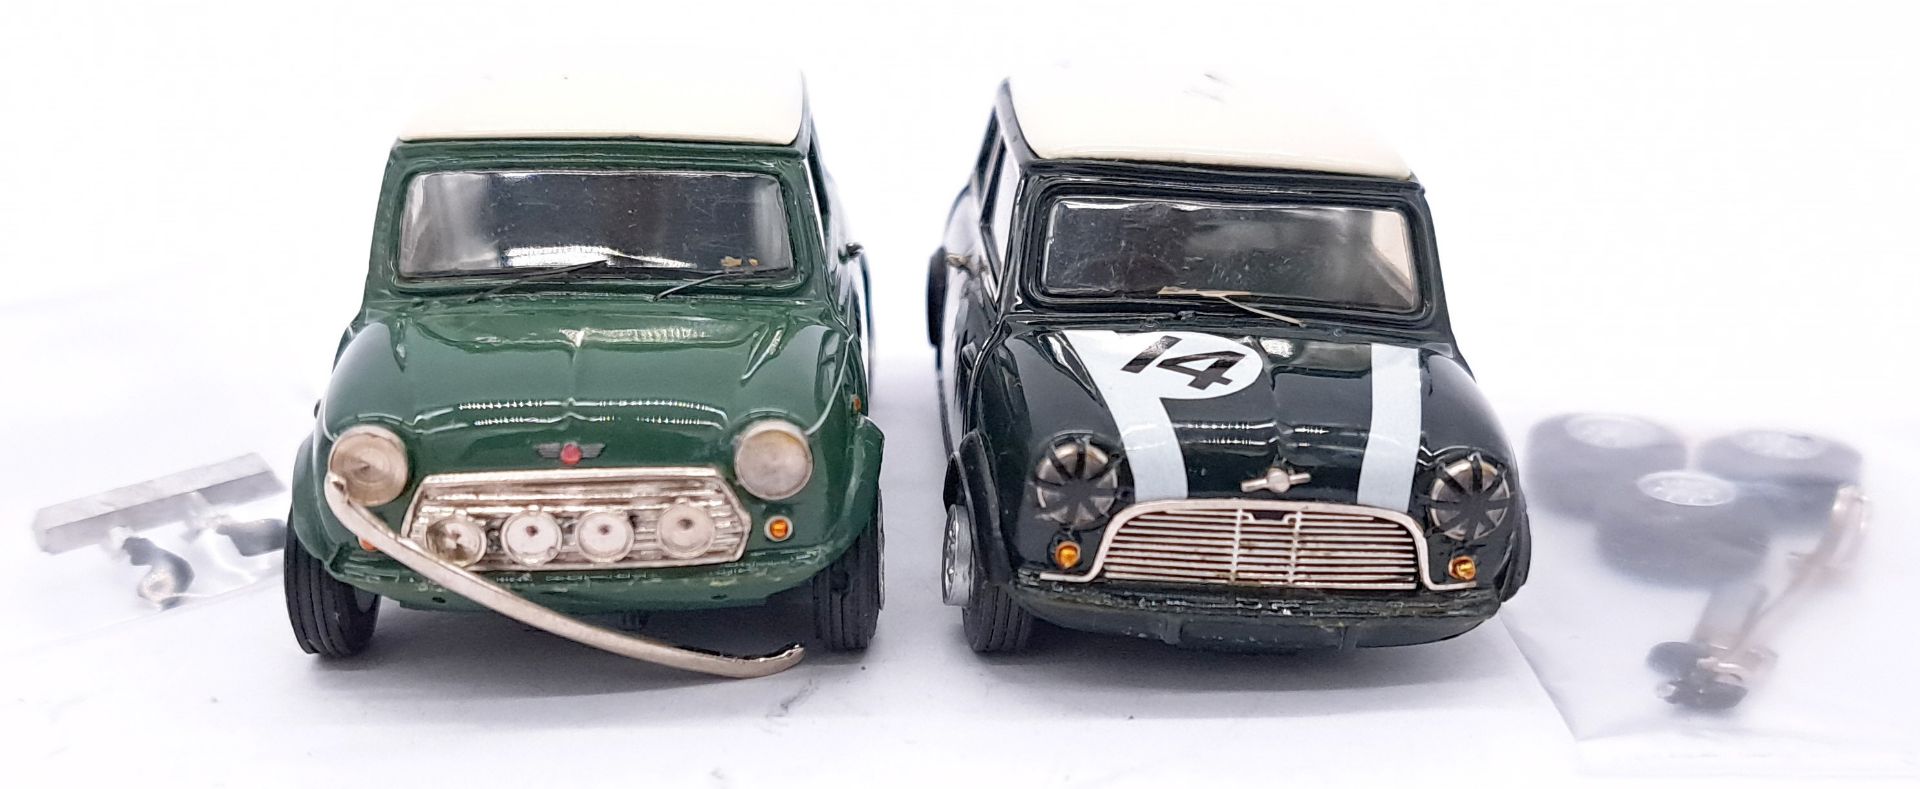 SMTS "Voiturette", a boxed pair of white metal Mini Cooper Rally models - Image 2 of 4